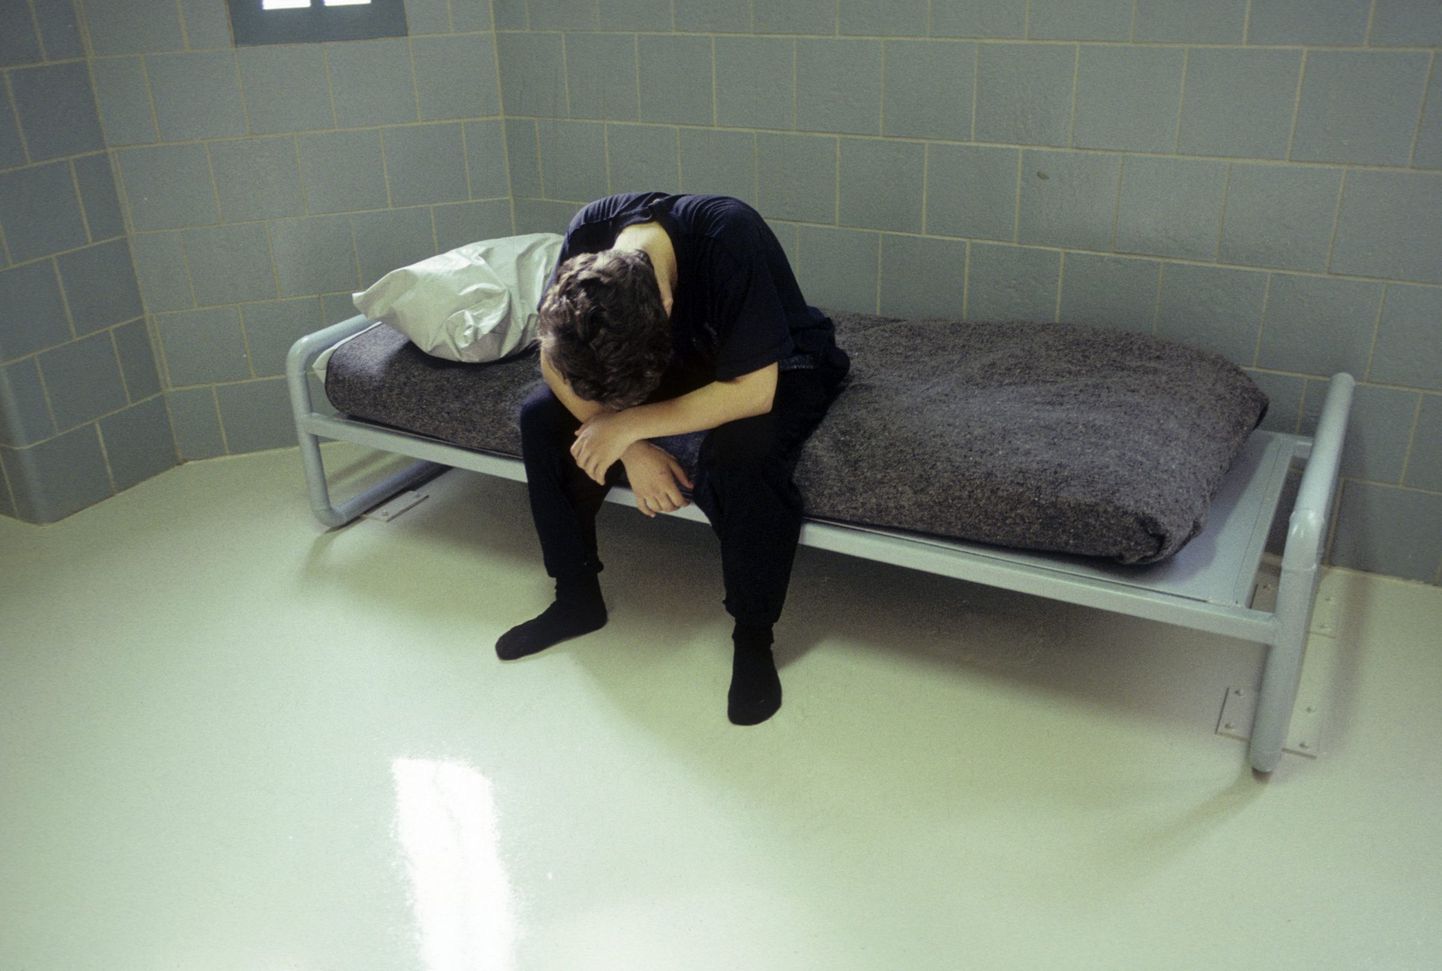 Austin, Texas:  Juvenile Detention Facility.  Simulation of inmate in cell. MR